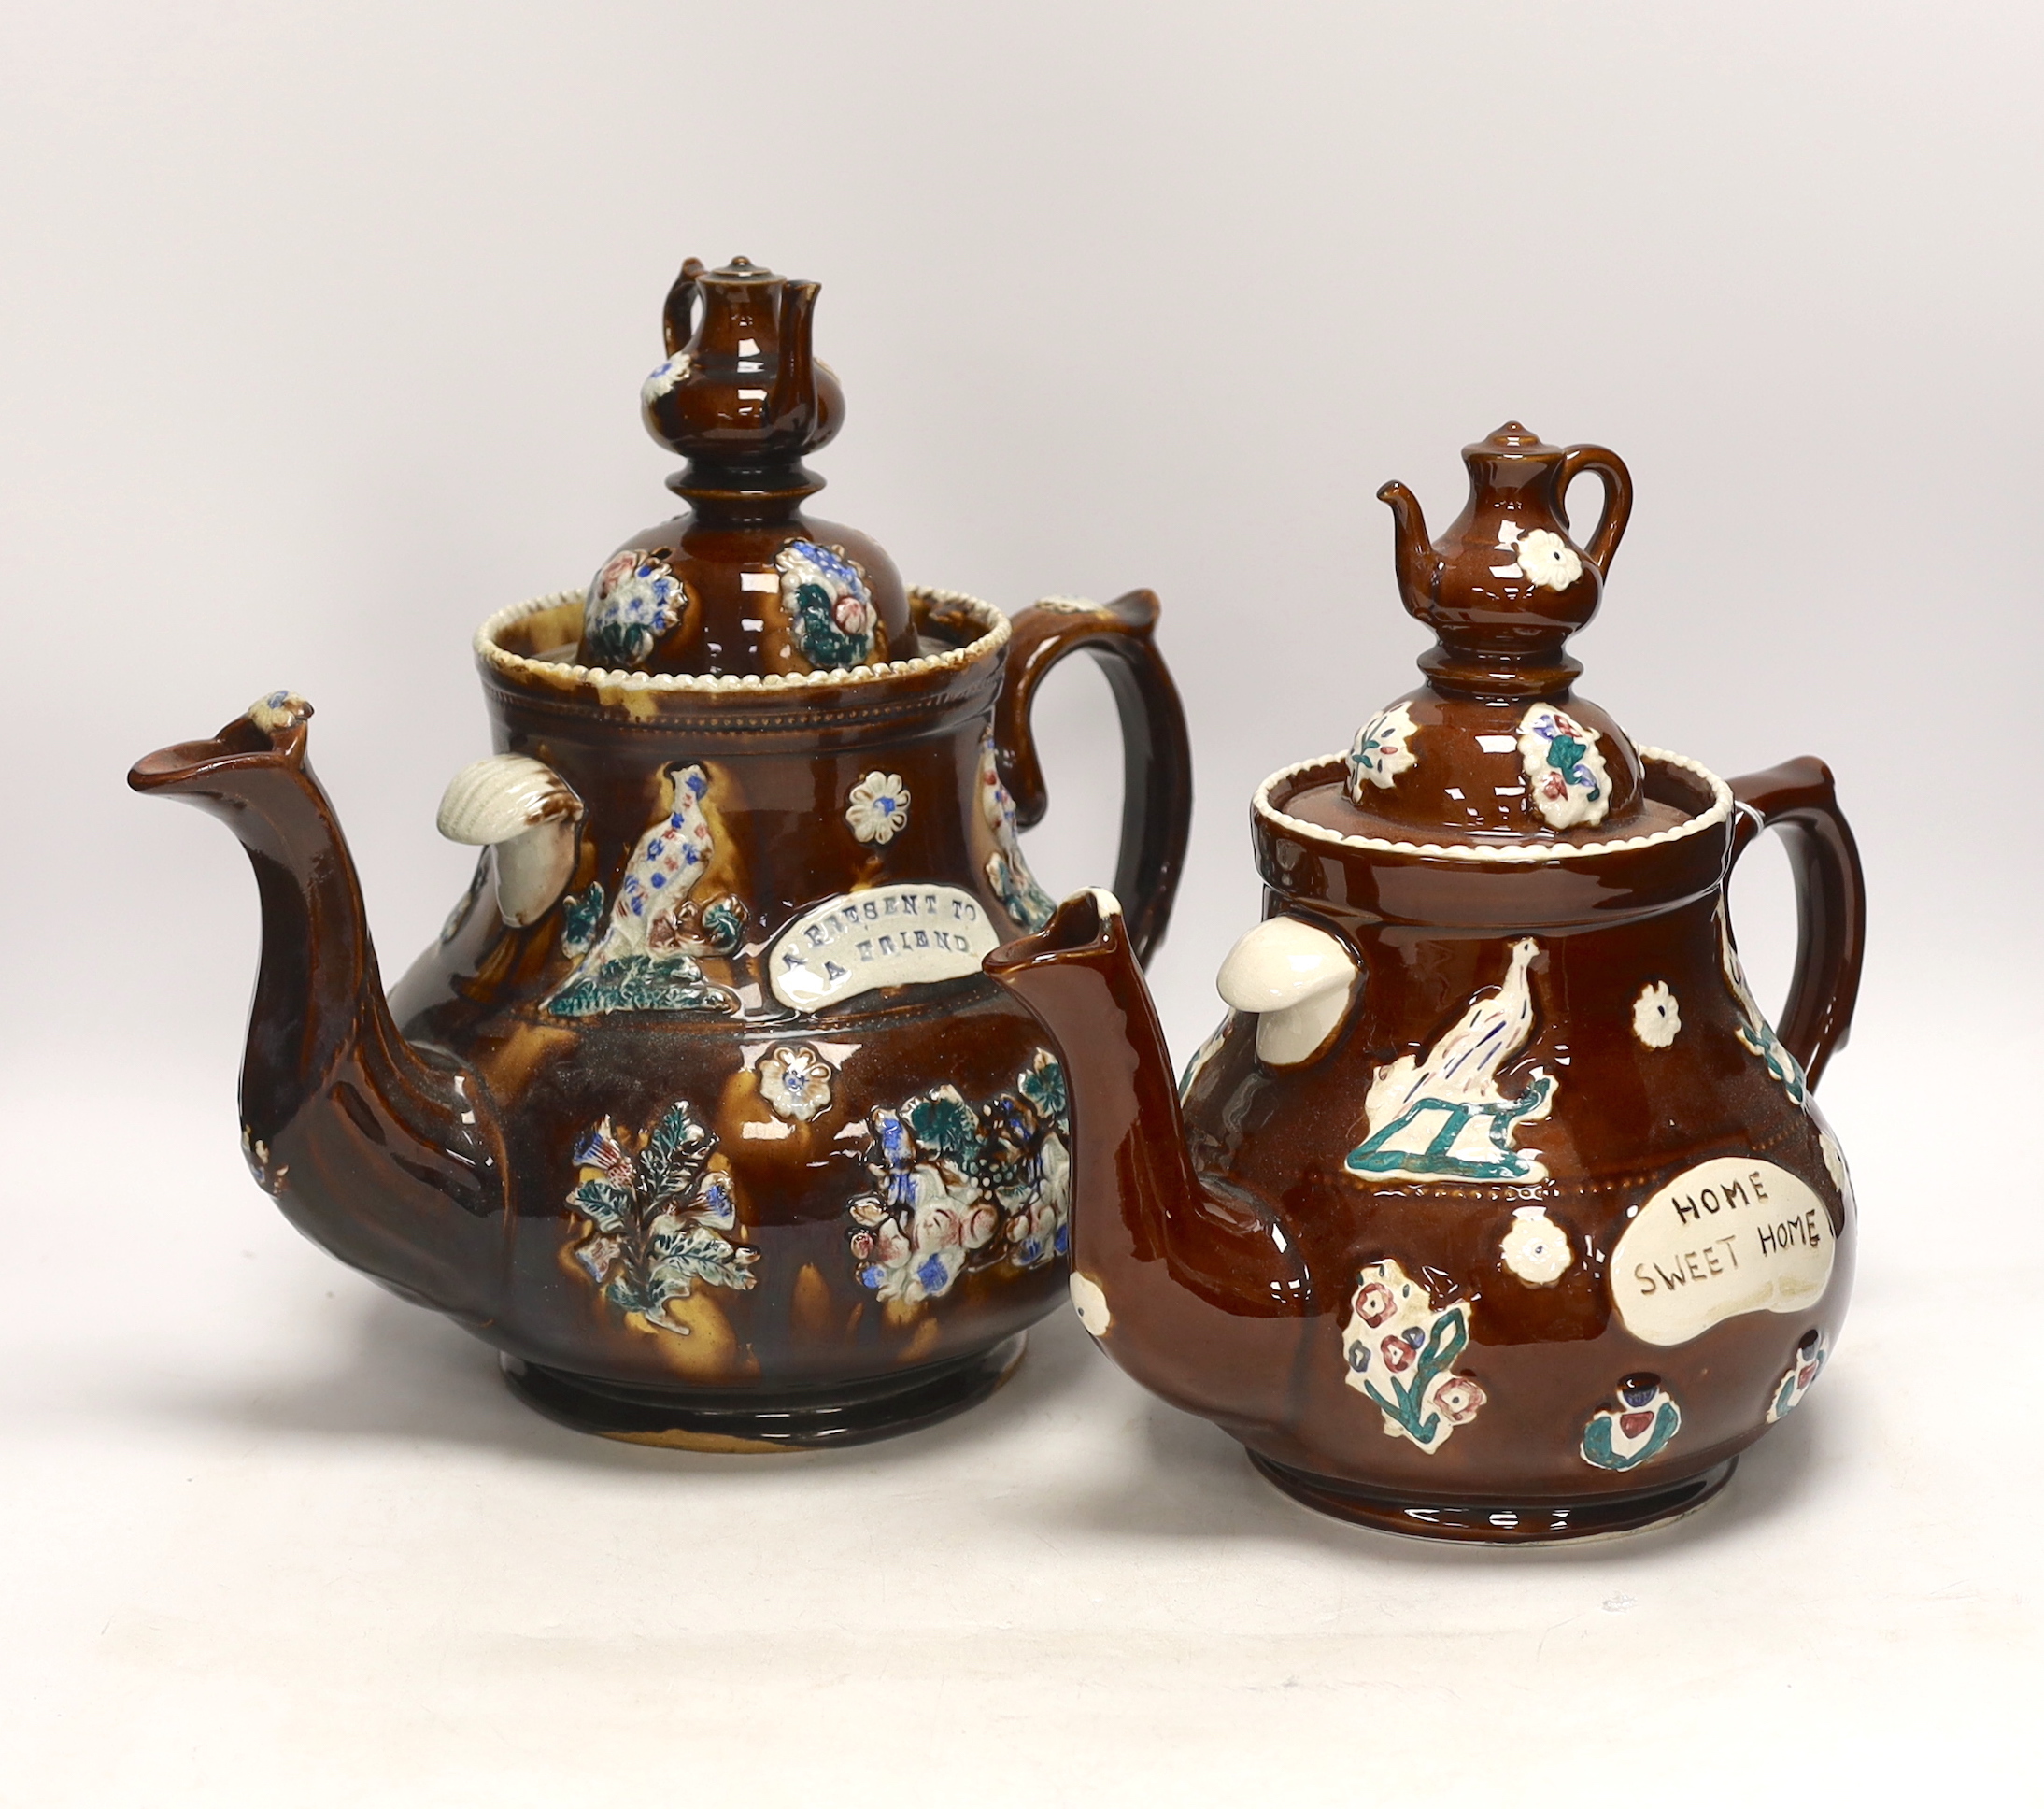 A late 19th century Measham barge ware teapot and cover, 31.5cm high, together with a reproduction teapot in the same style